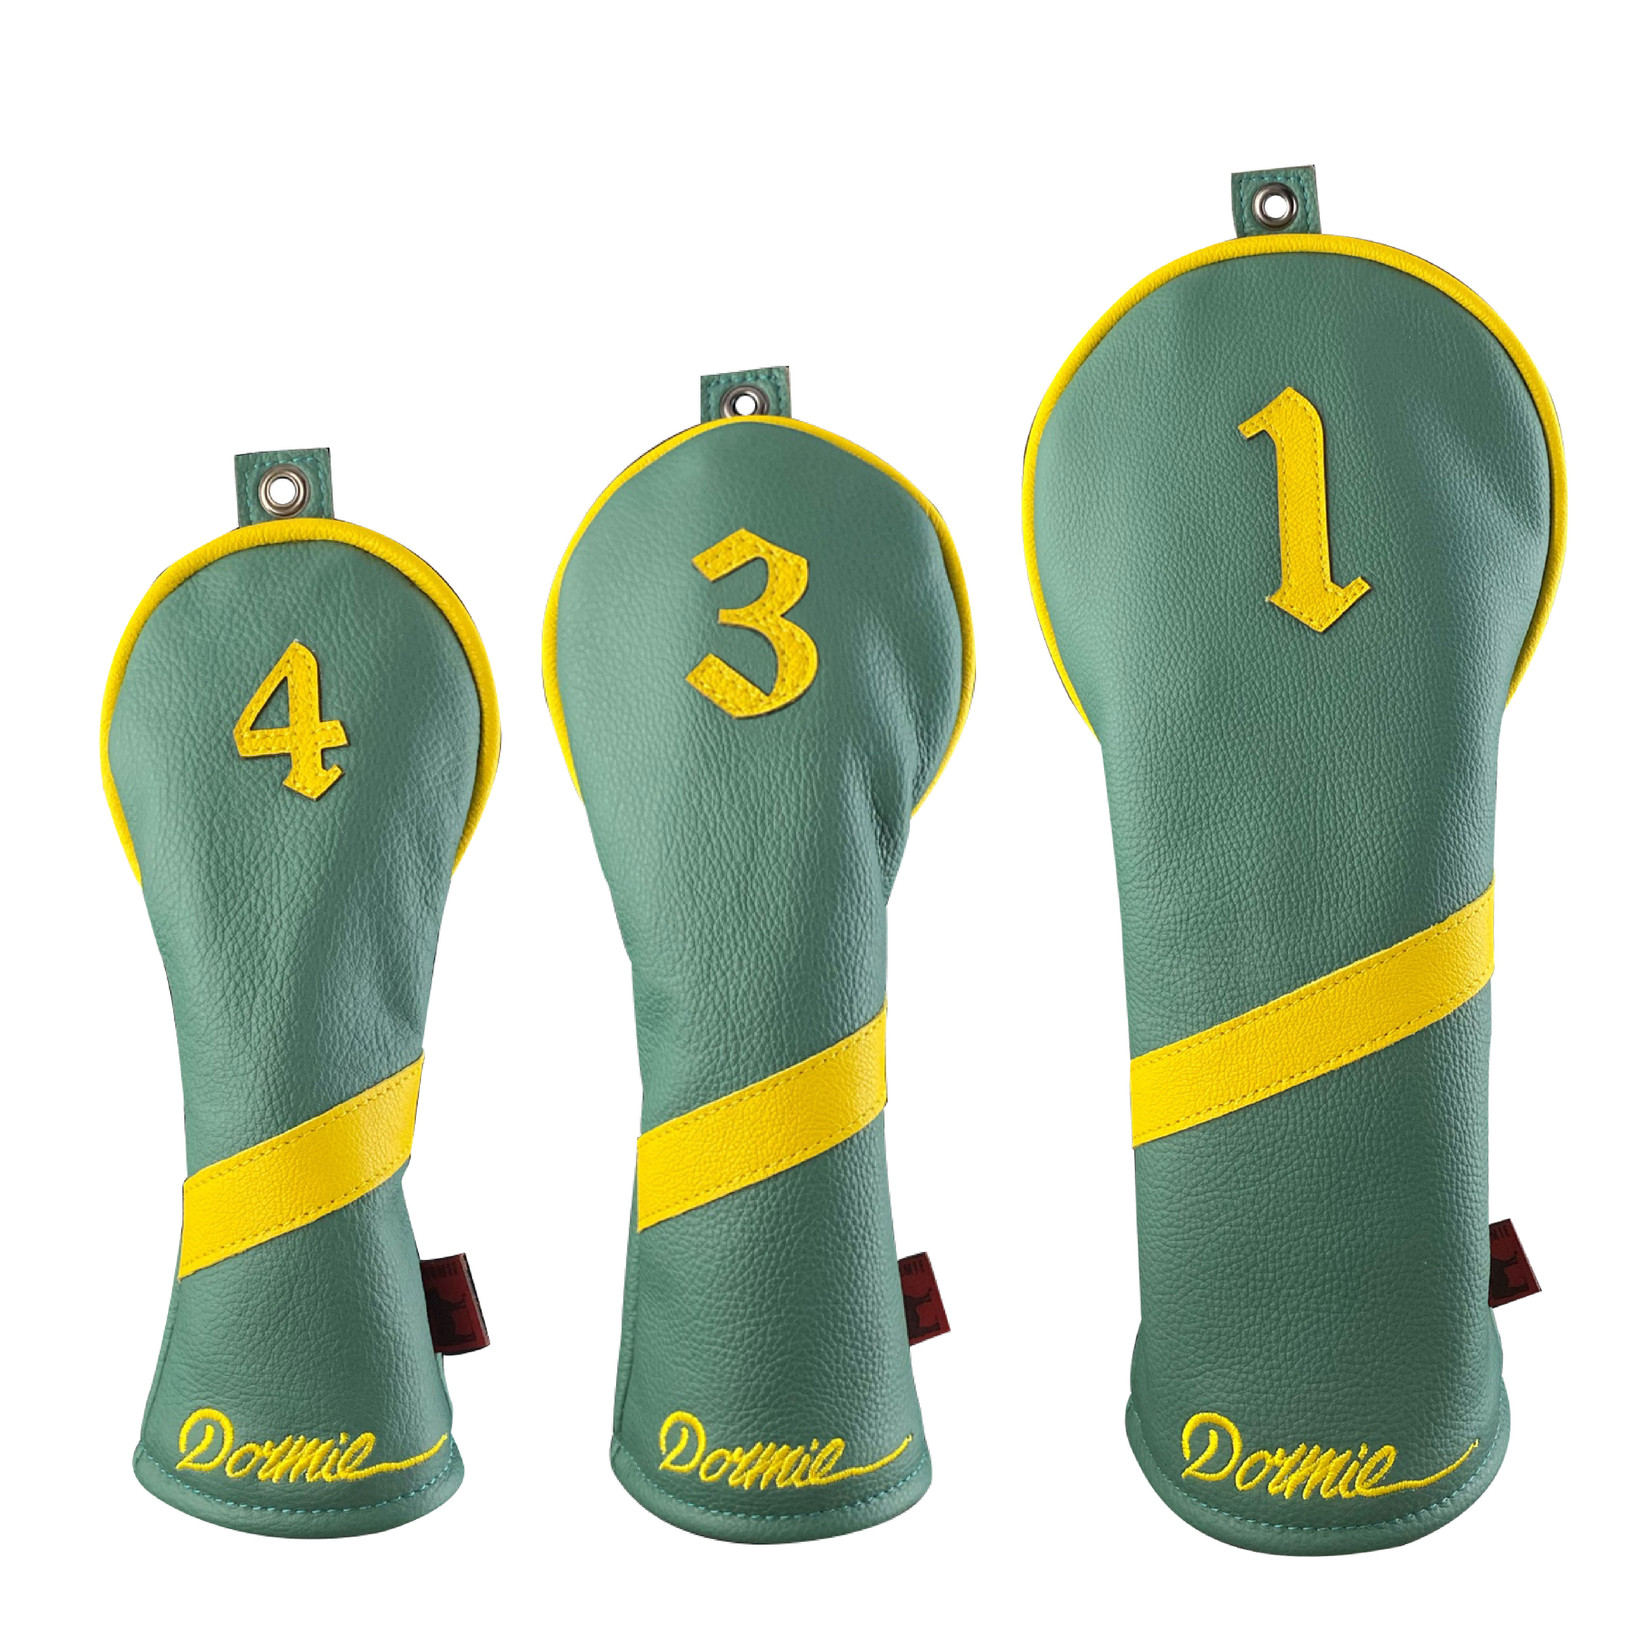 Dormie Workshop Limited 2022 Dormie Snead Headcover Set (Dr/Fwy/Hy)